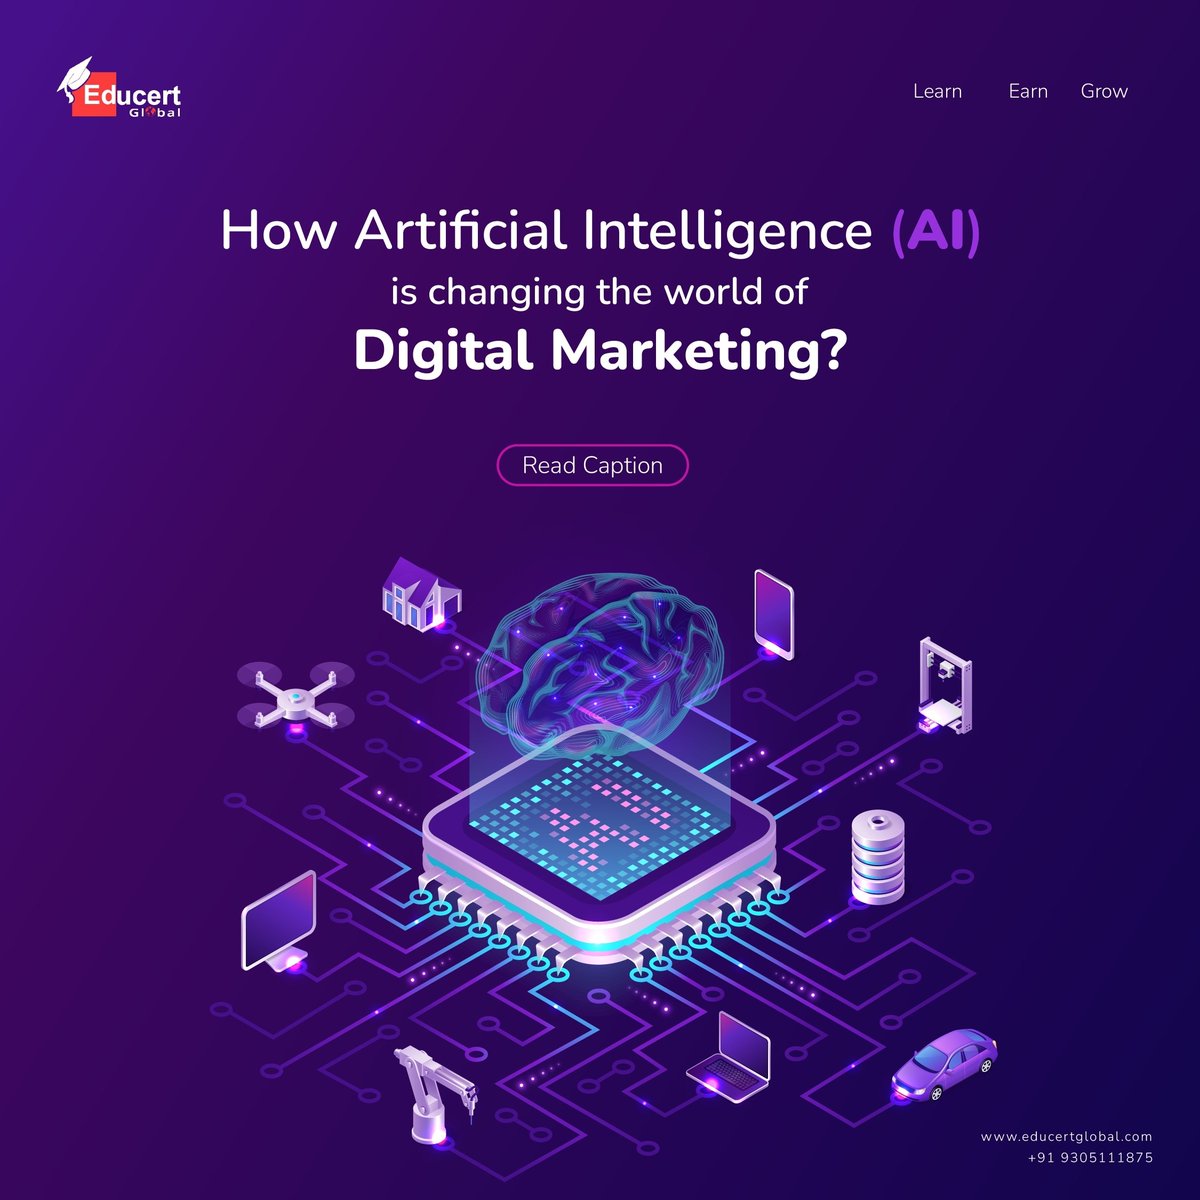 🚀 Revolutionizing Targeting
🤖 Chatbots Enhance Interaction
📊 Data-Driven Insights
🌐 Dynamic Content Optimization
💡 Predictive Analytics
📱 Voice Search Optimization
🔄 Automated Ad Campaigns
🛍️ Personalized Shopping Experiences
#AIinDigitalMarketing #ChatbotsInAction